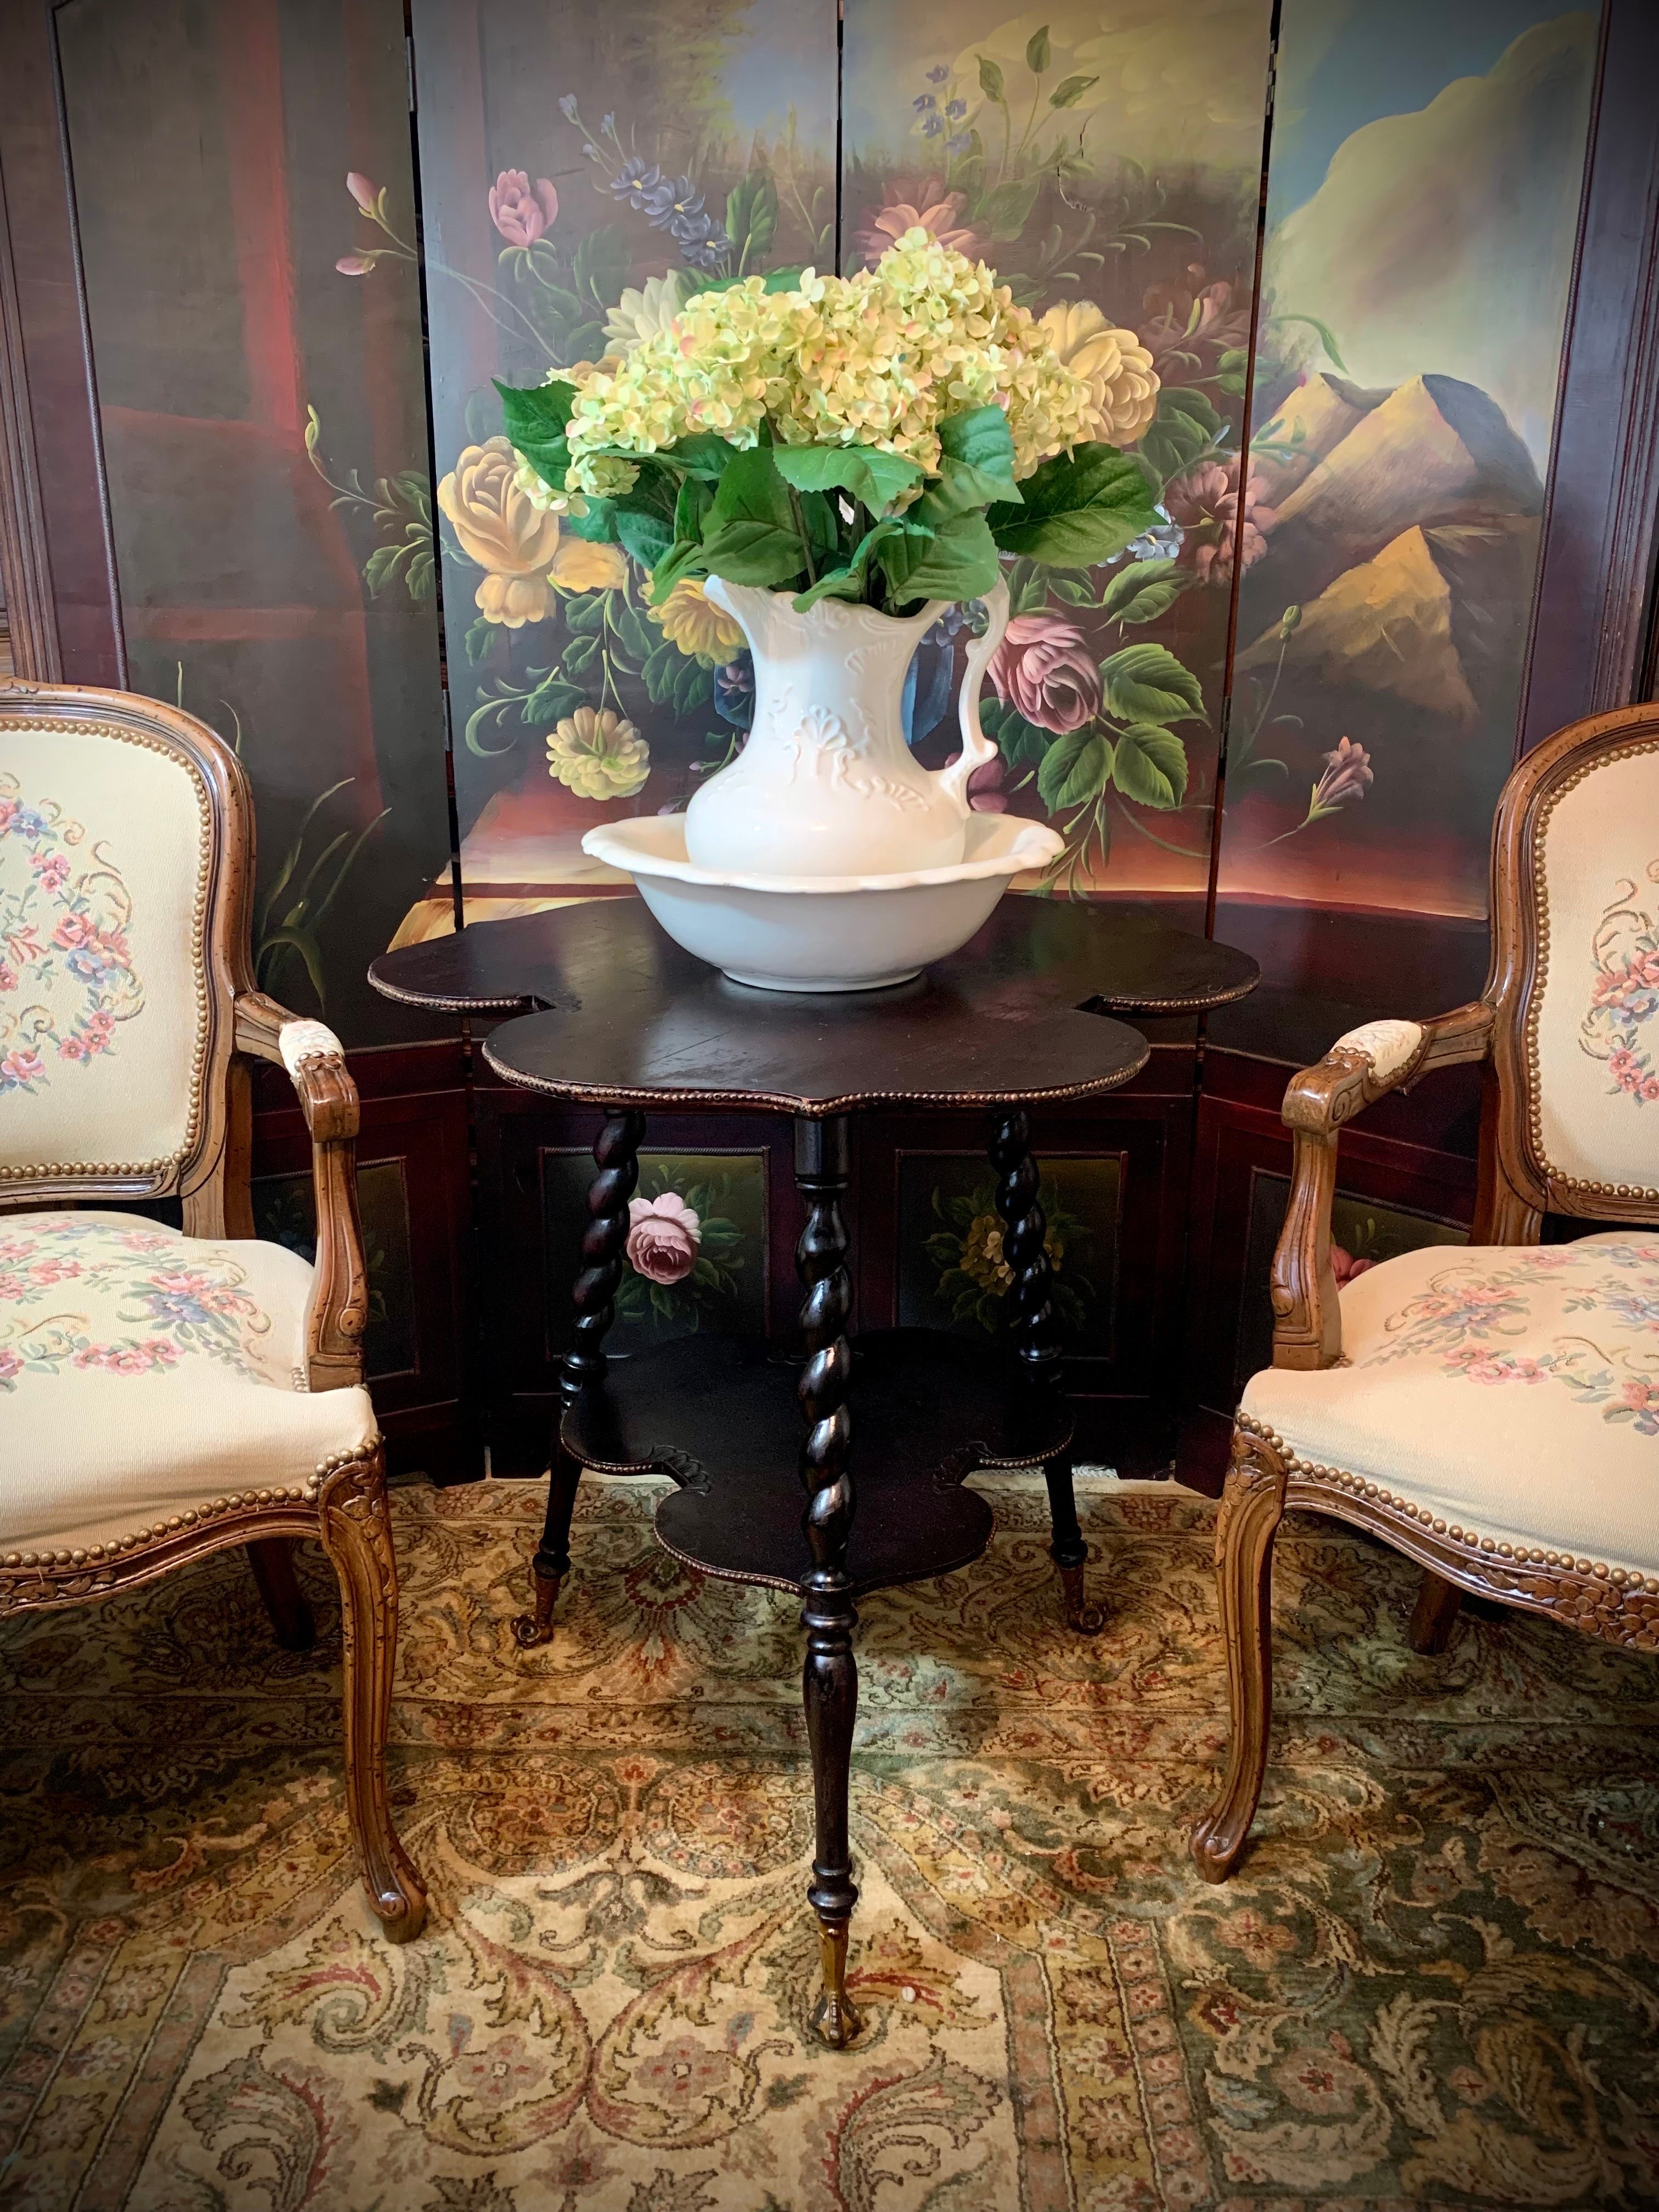 This rare antique cloverleaf garden table provides an elegant way to display eye-catching seasonal floral arrangements just as it originally found it’s place in the iconic English garden rooms of the 18th century. 

The spiral lathe-turned legs and